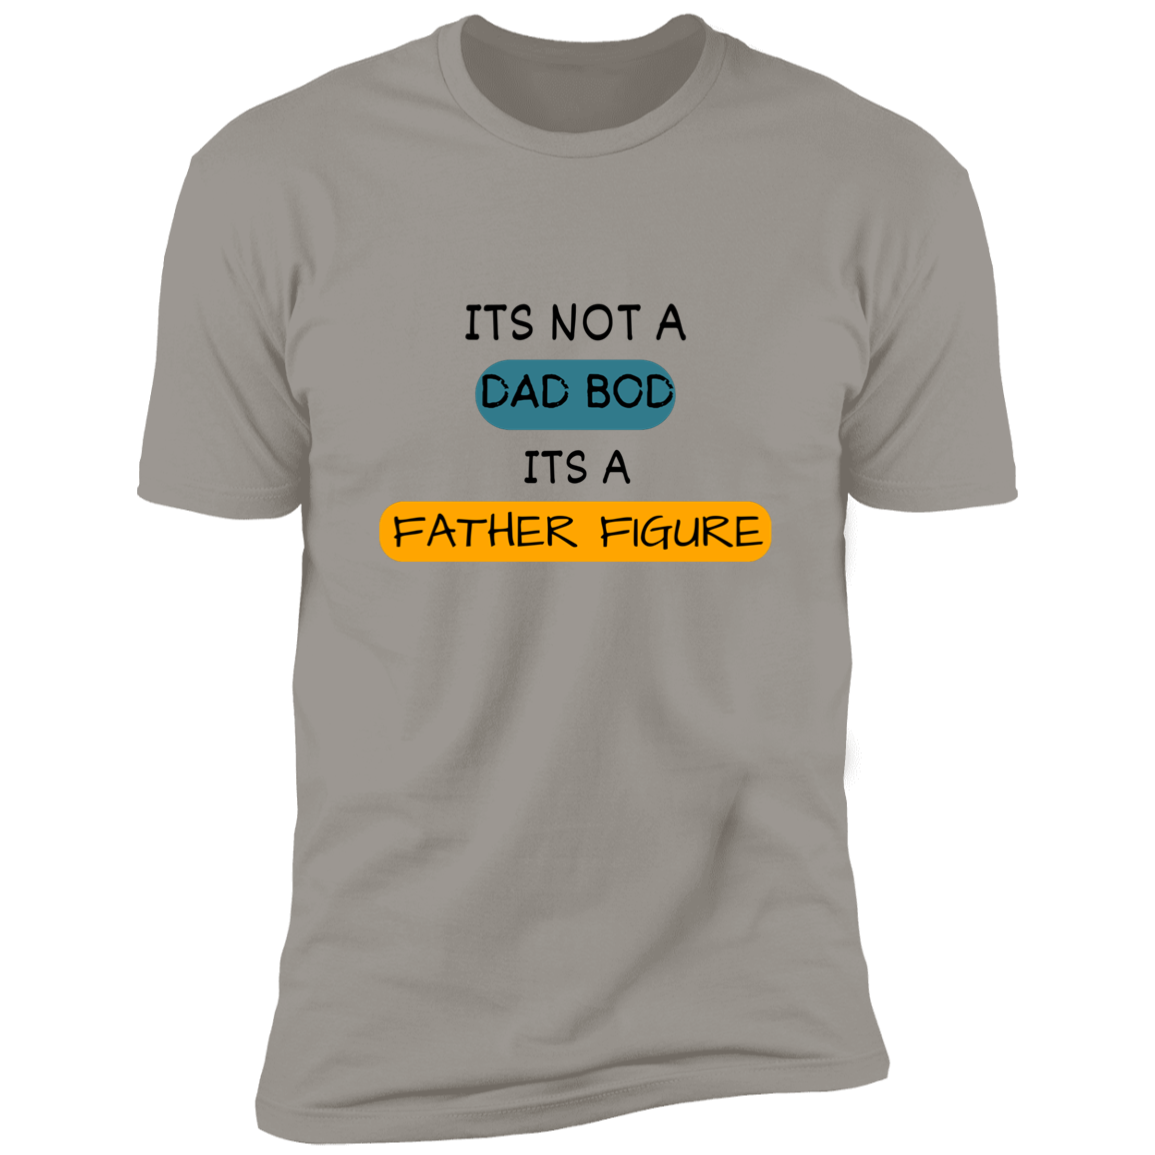 Its not a dad bod Premium Short Sleeve Tee